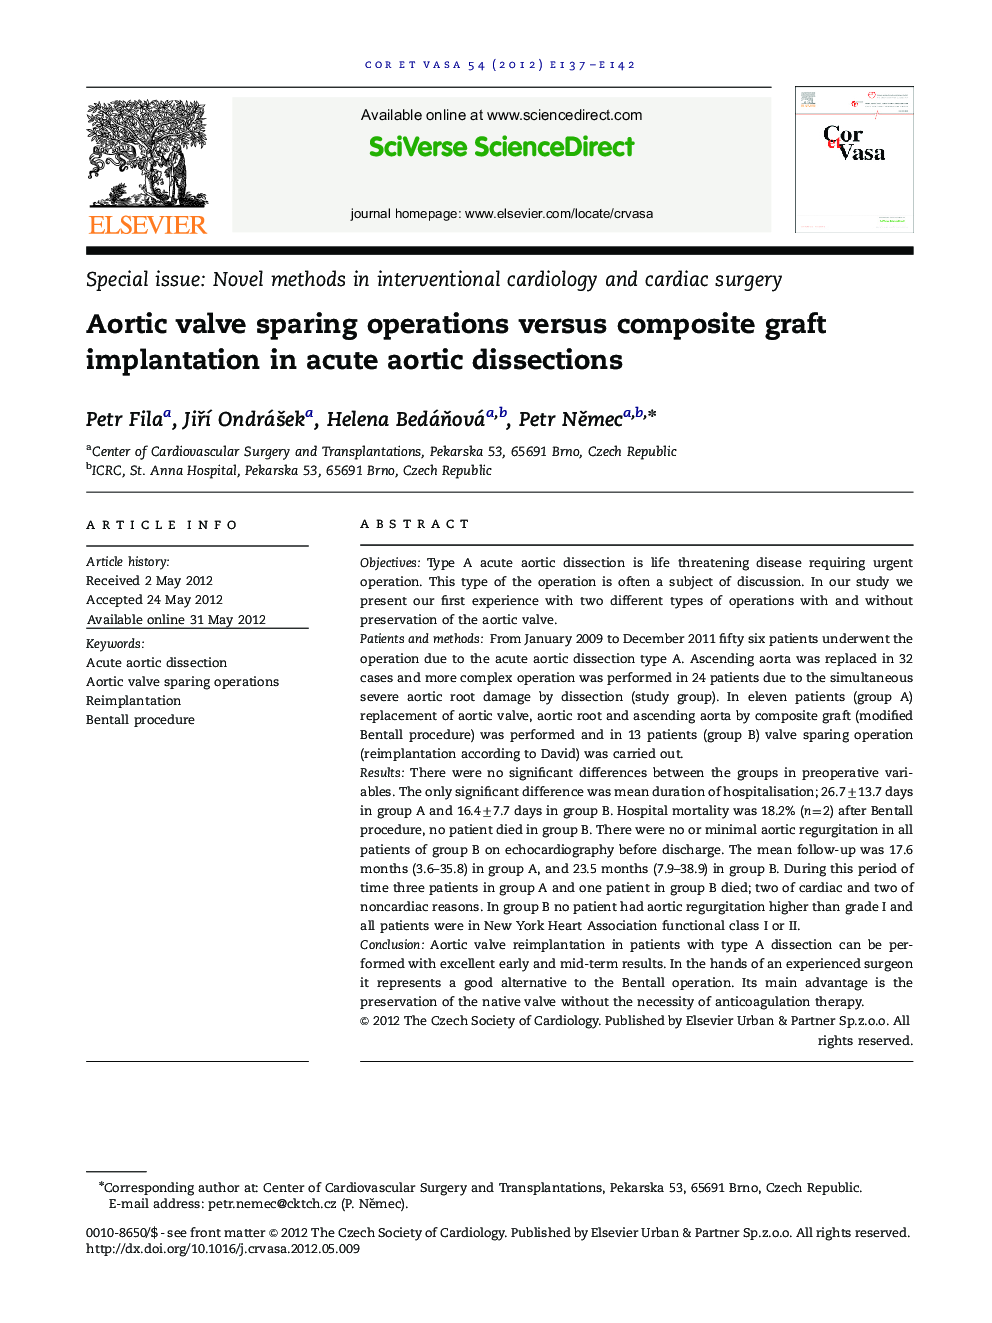 Aortic valve sparing operations versus composite graft implantation in acute aortic dissections